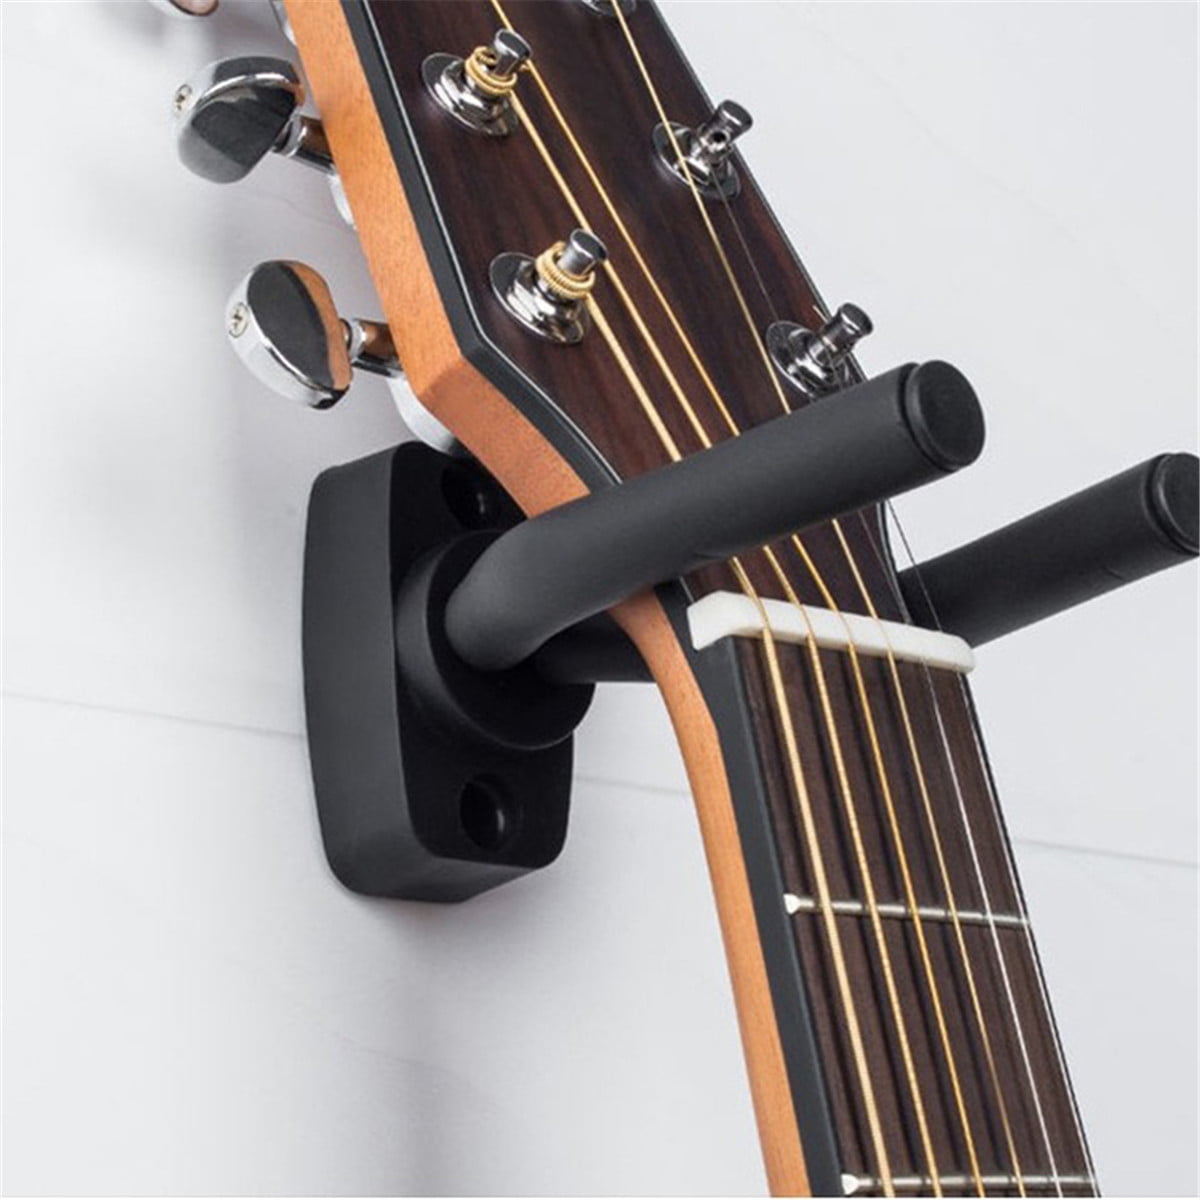 suitable for all guitars and other instruments ukulele,banjo etc. Shentian Pack of 4 Guitar hook such as bass Holder bracket wall hook A violin